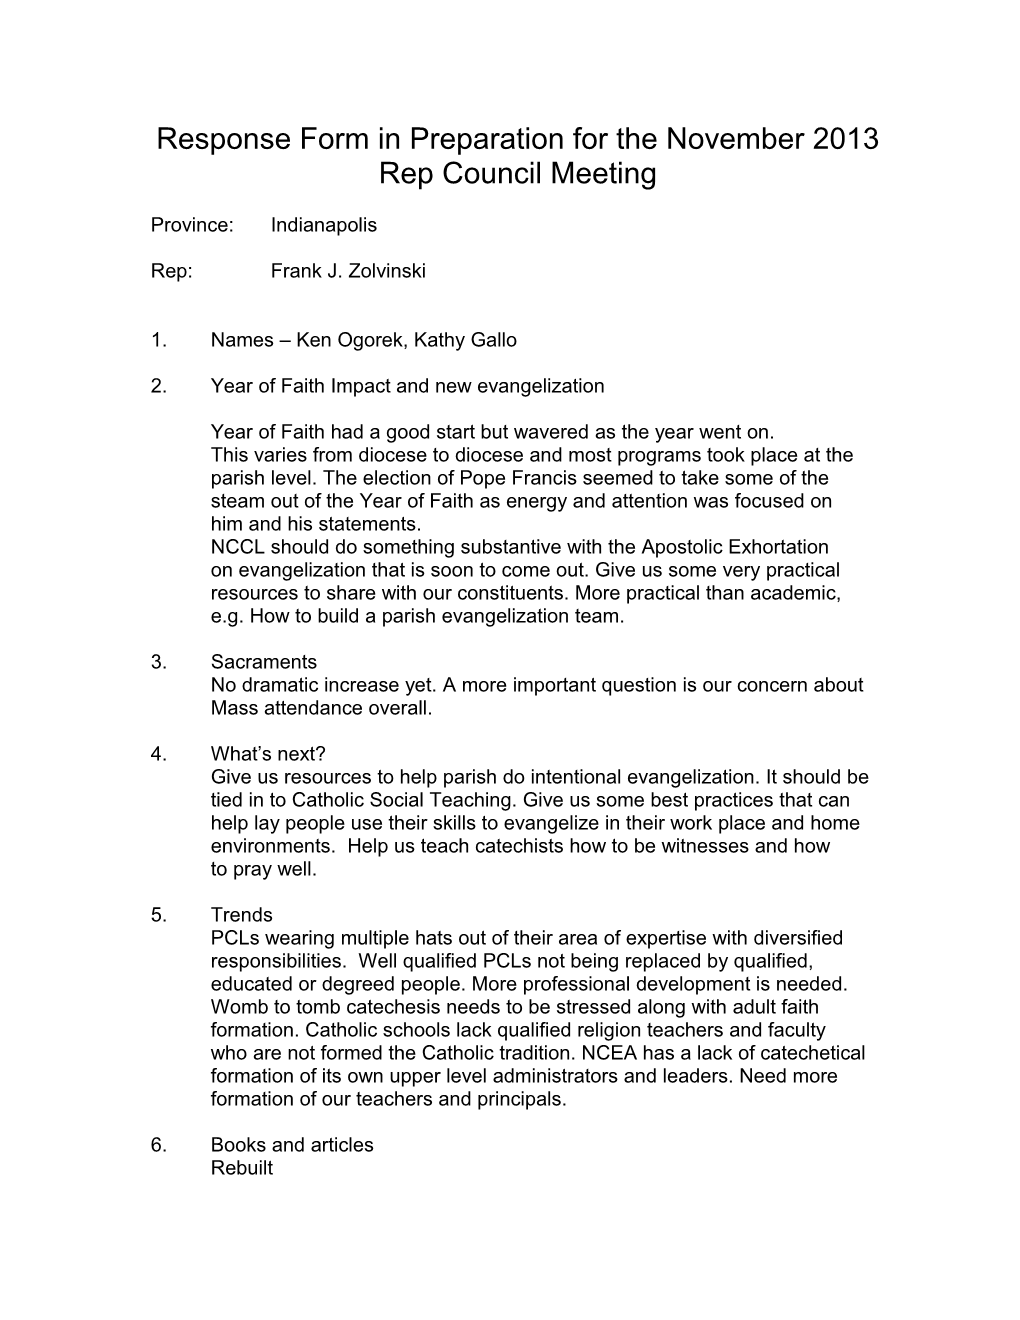 Response Form in Preparation for the November 2013 Rep Council Meeting